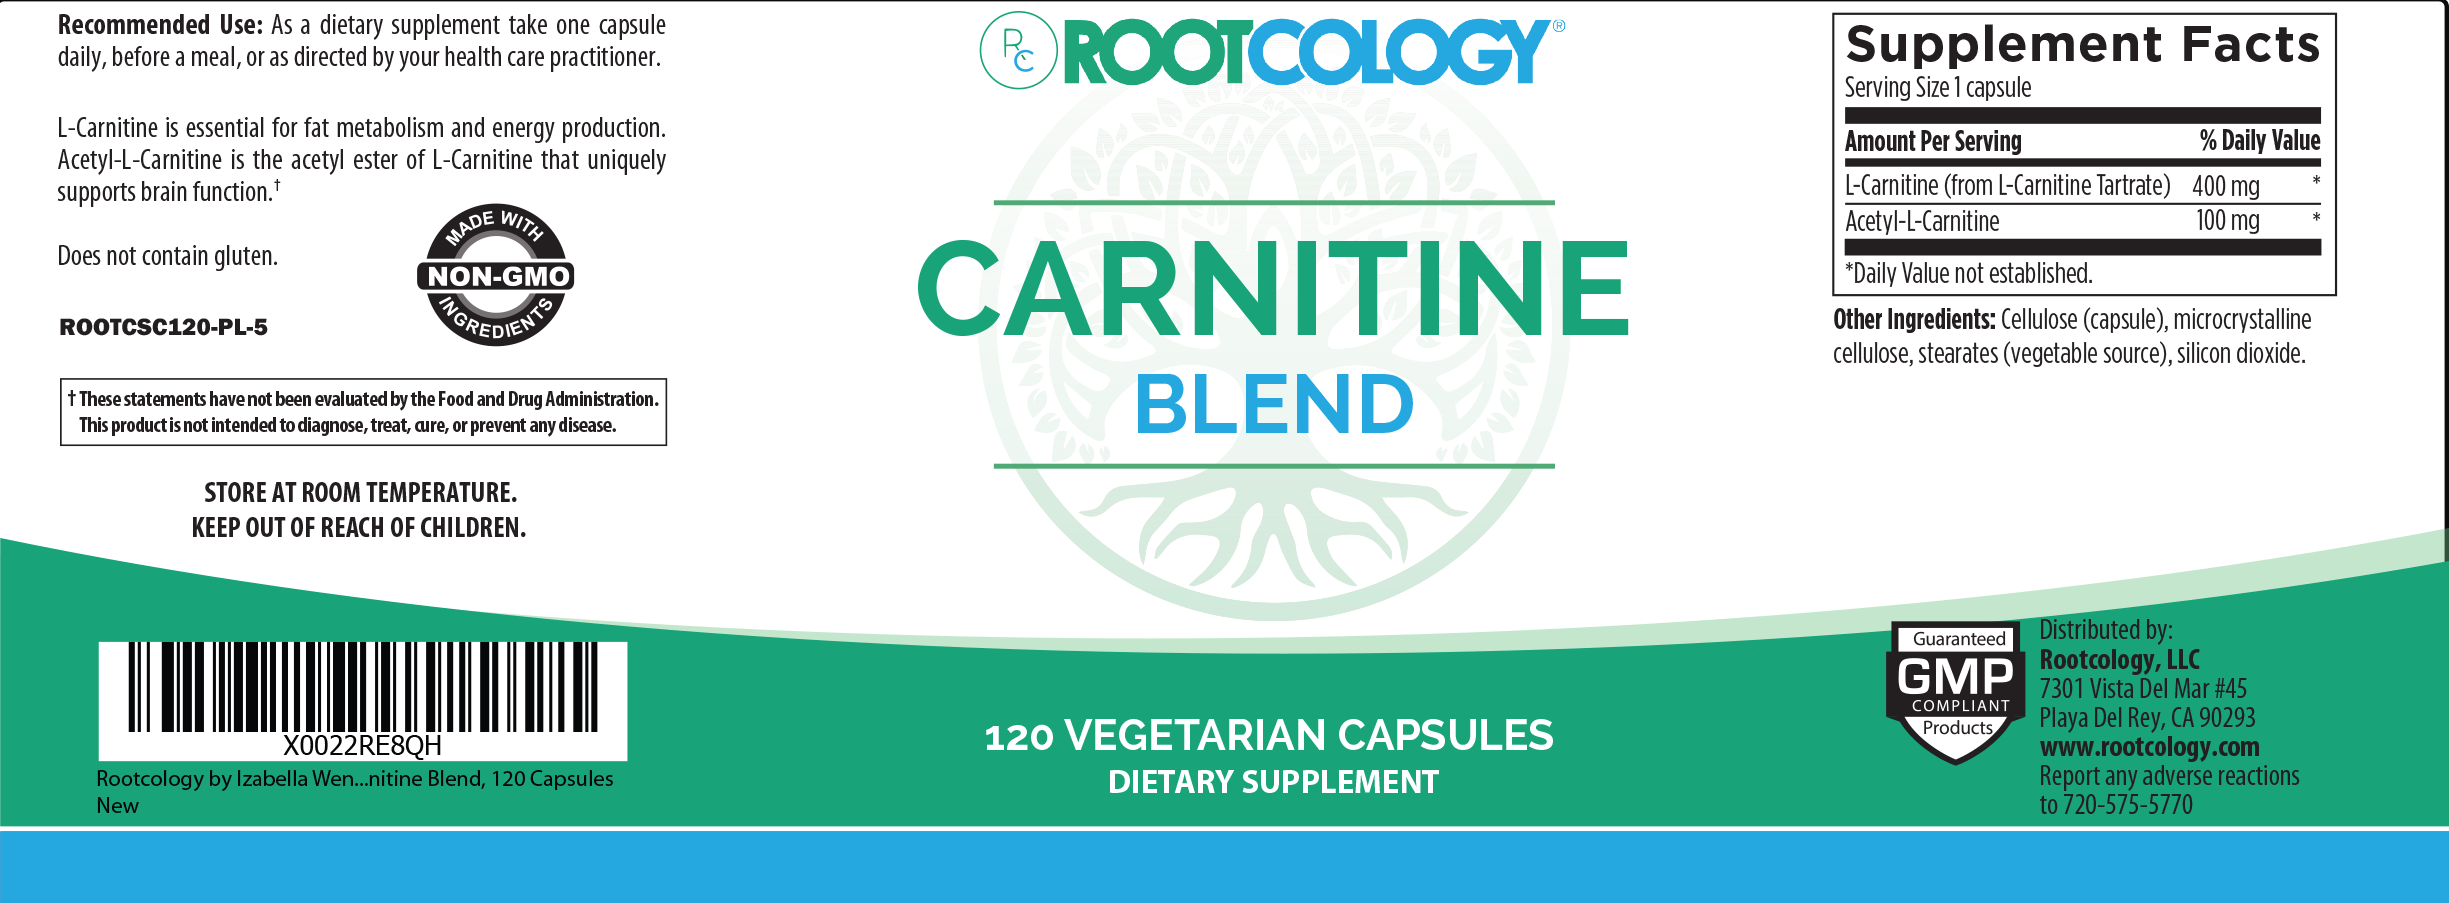 Rootcology Carnitine Supplement Label